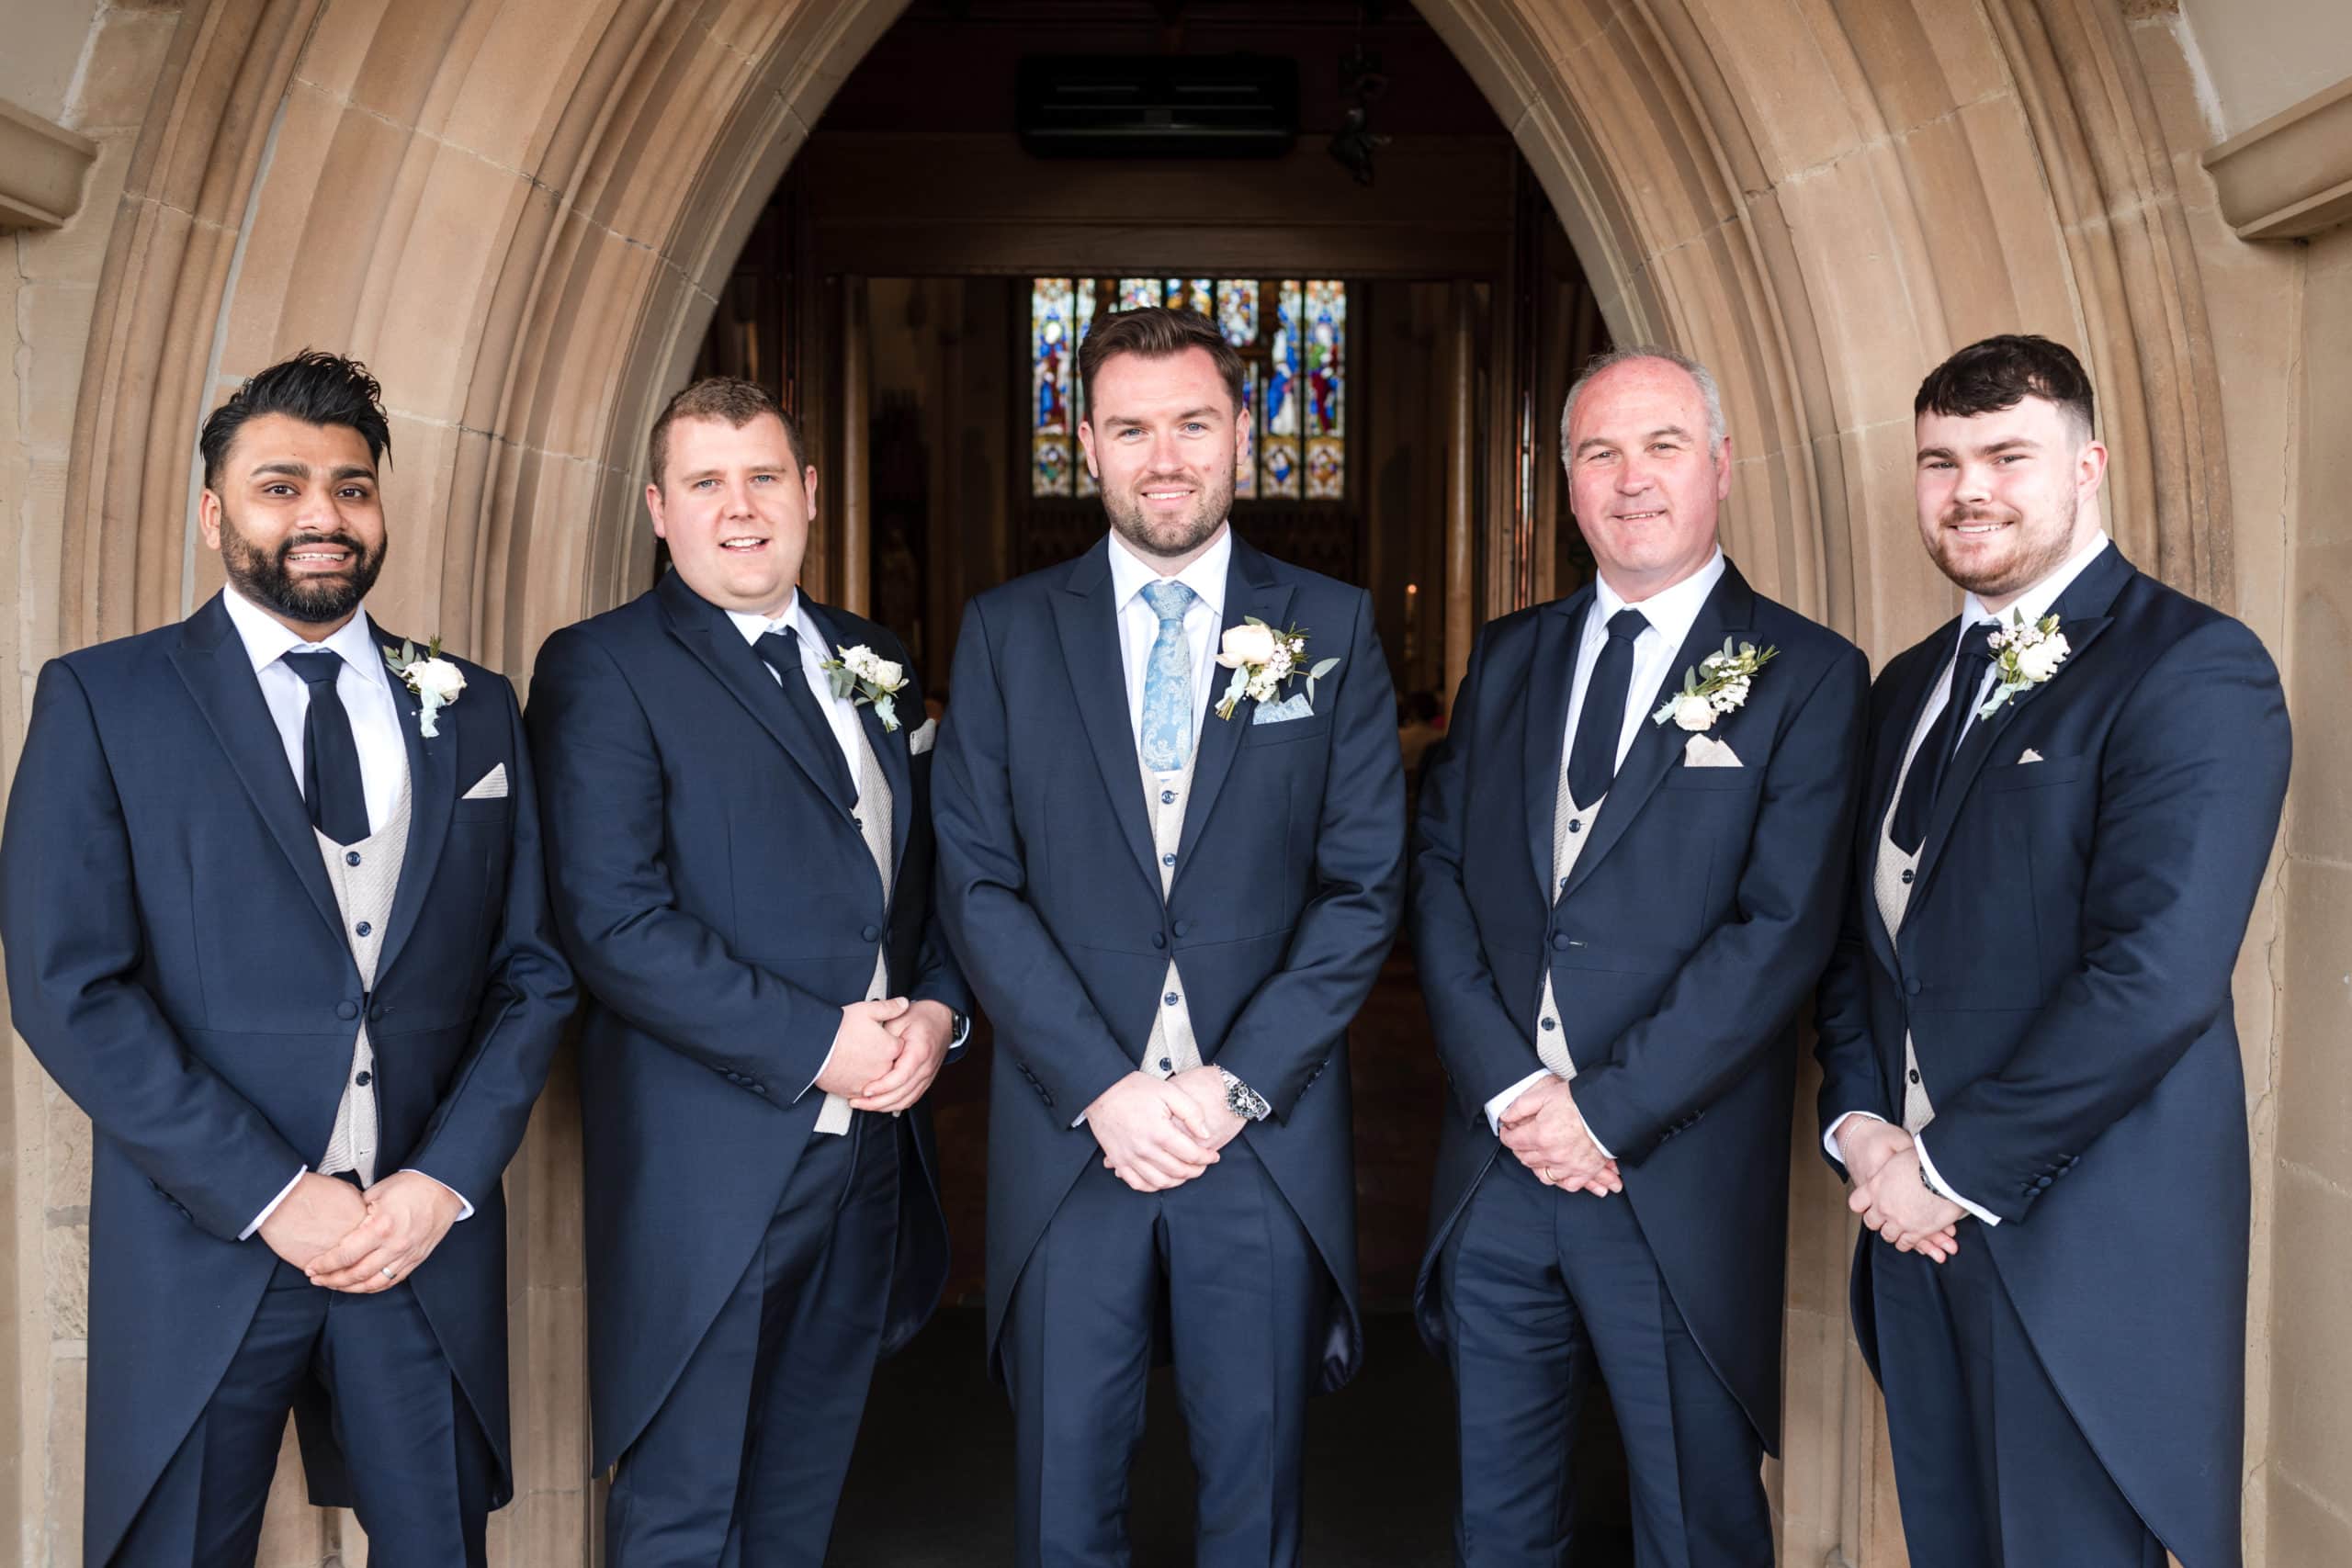 Groom and Groomsmen wearing traditional navy blue morning suits stand outside the entrance to Shrewsbury Cathedral